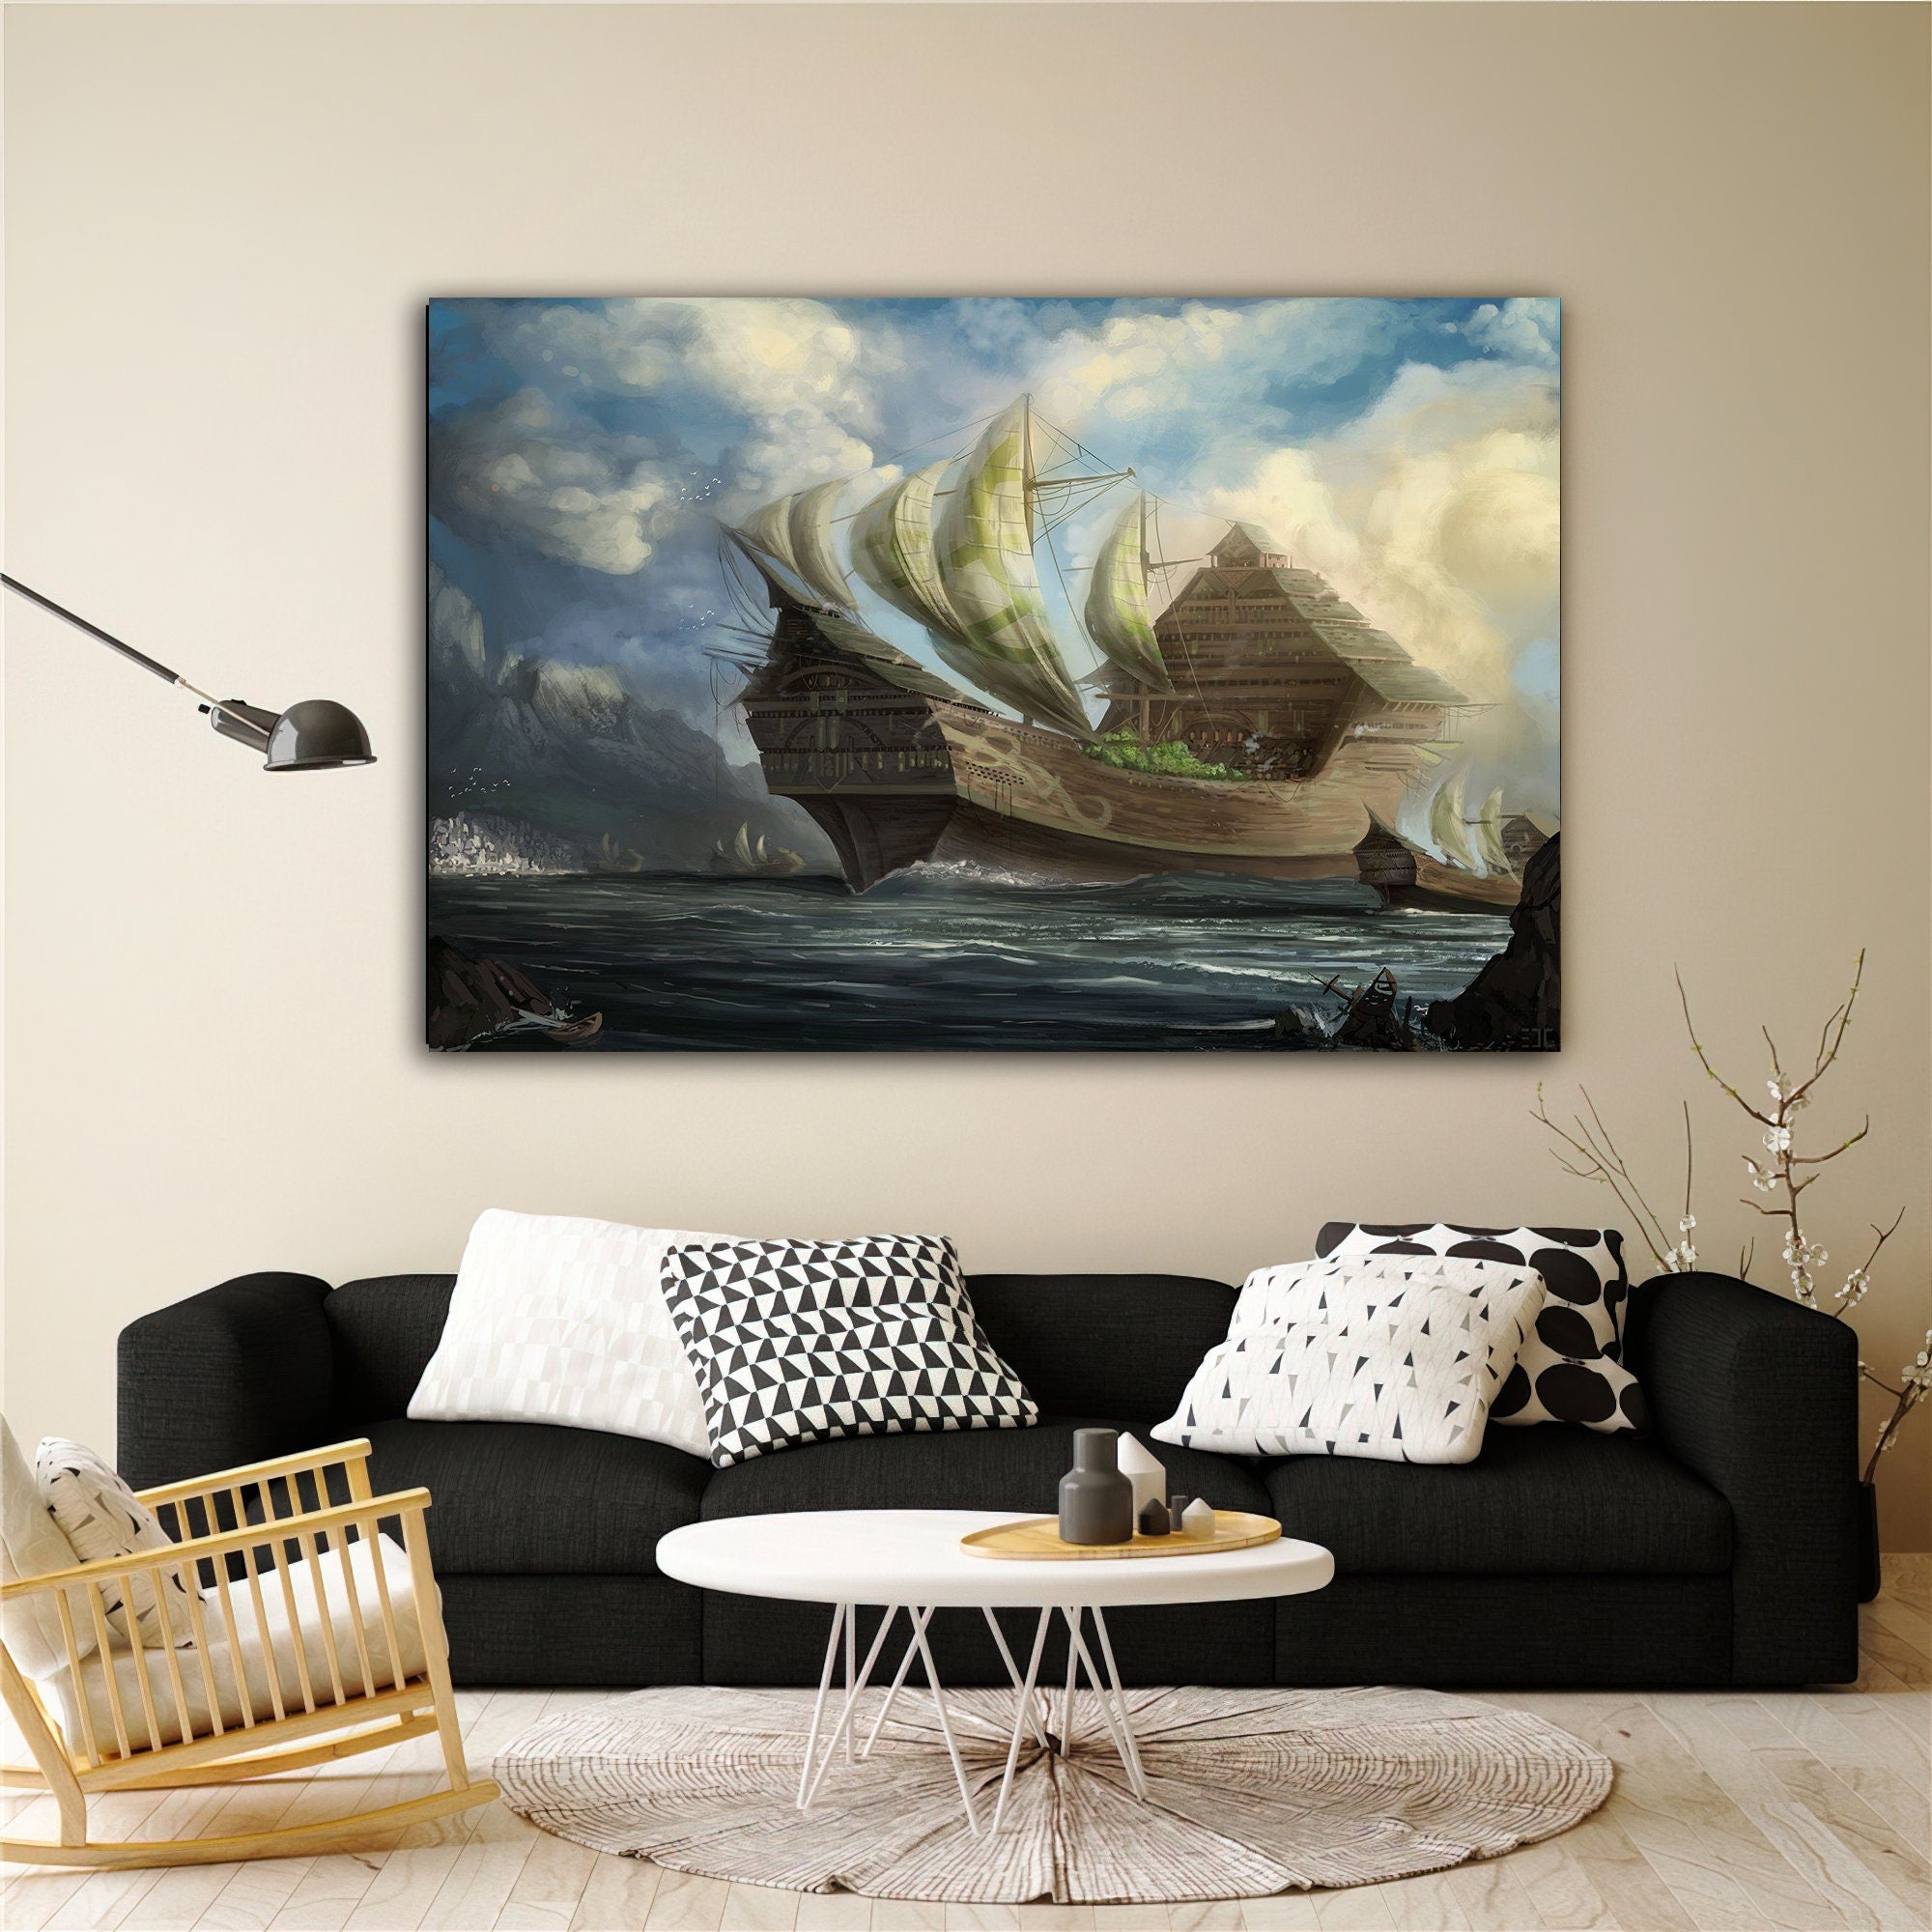 ship canvas painting, pirate ship painting, sailing painting, boating ship painting, rowing boat painting, ships canvas painting, Art for Sale